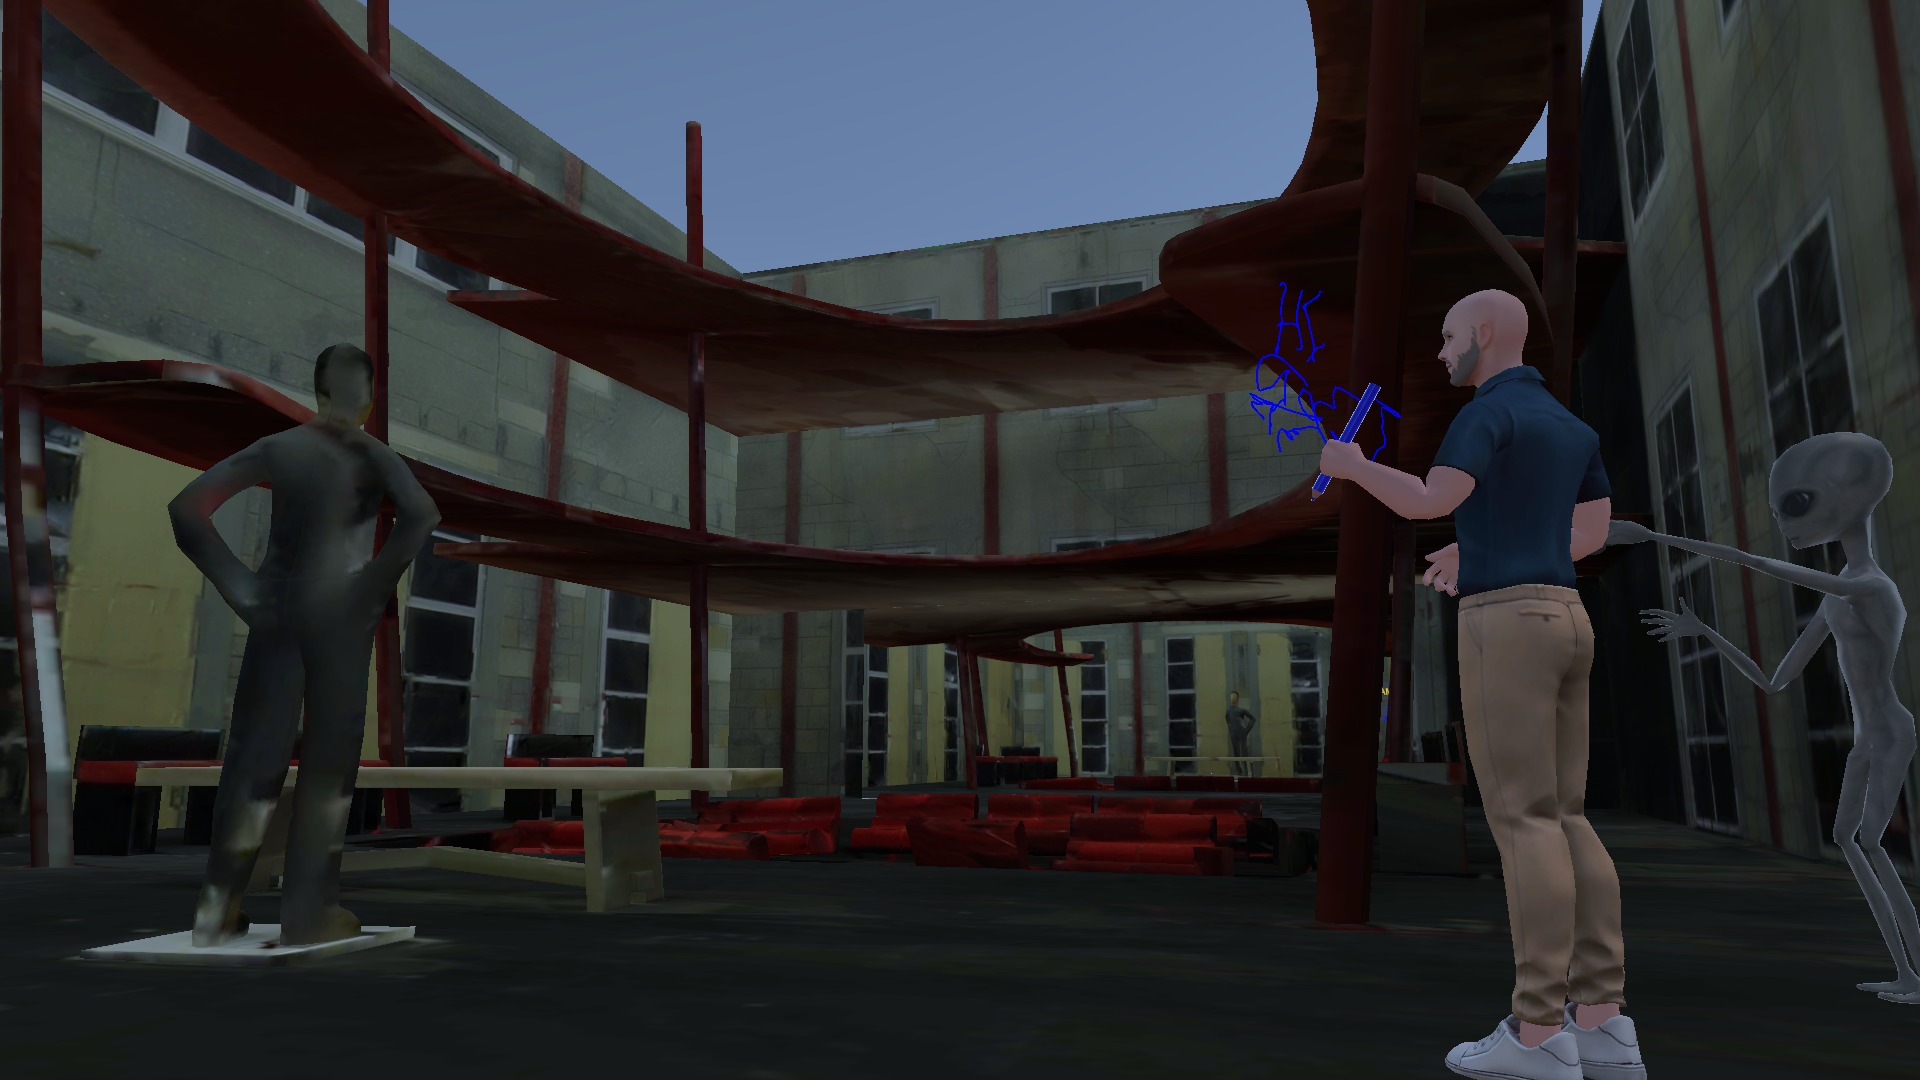 A VR environment. There are 2 characters facing each other, one holding a blue pen which he uses to write